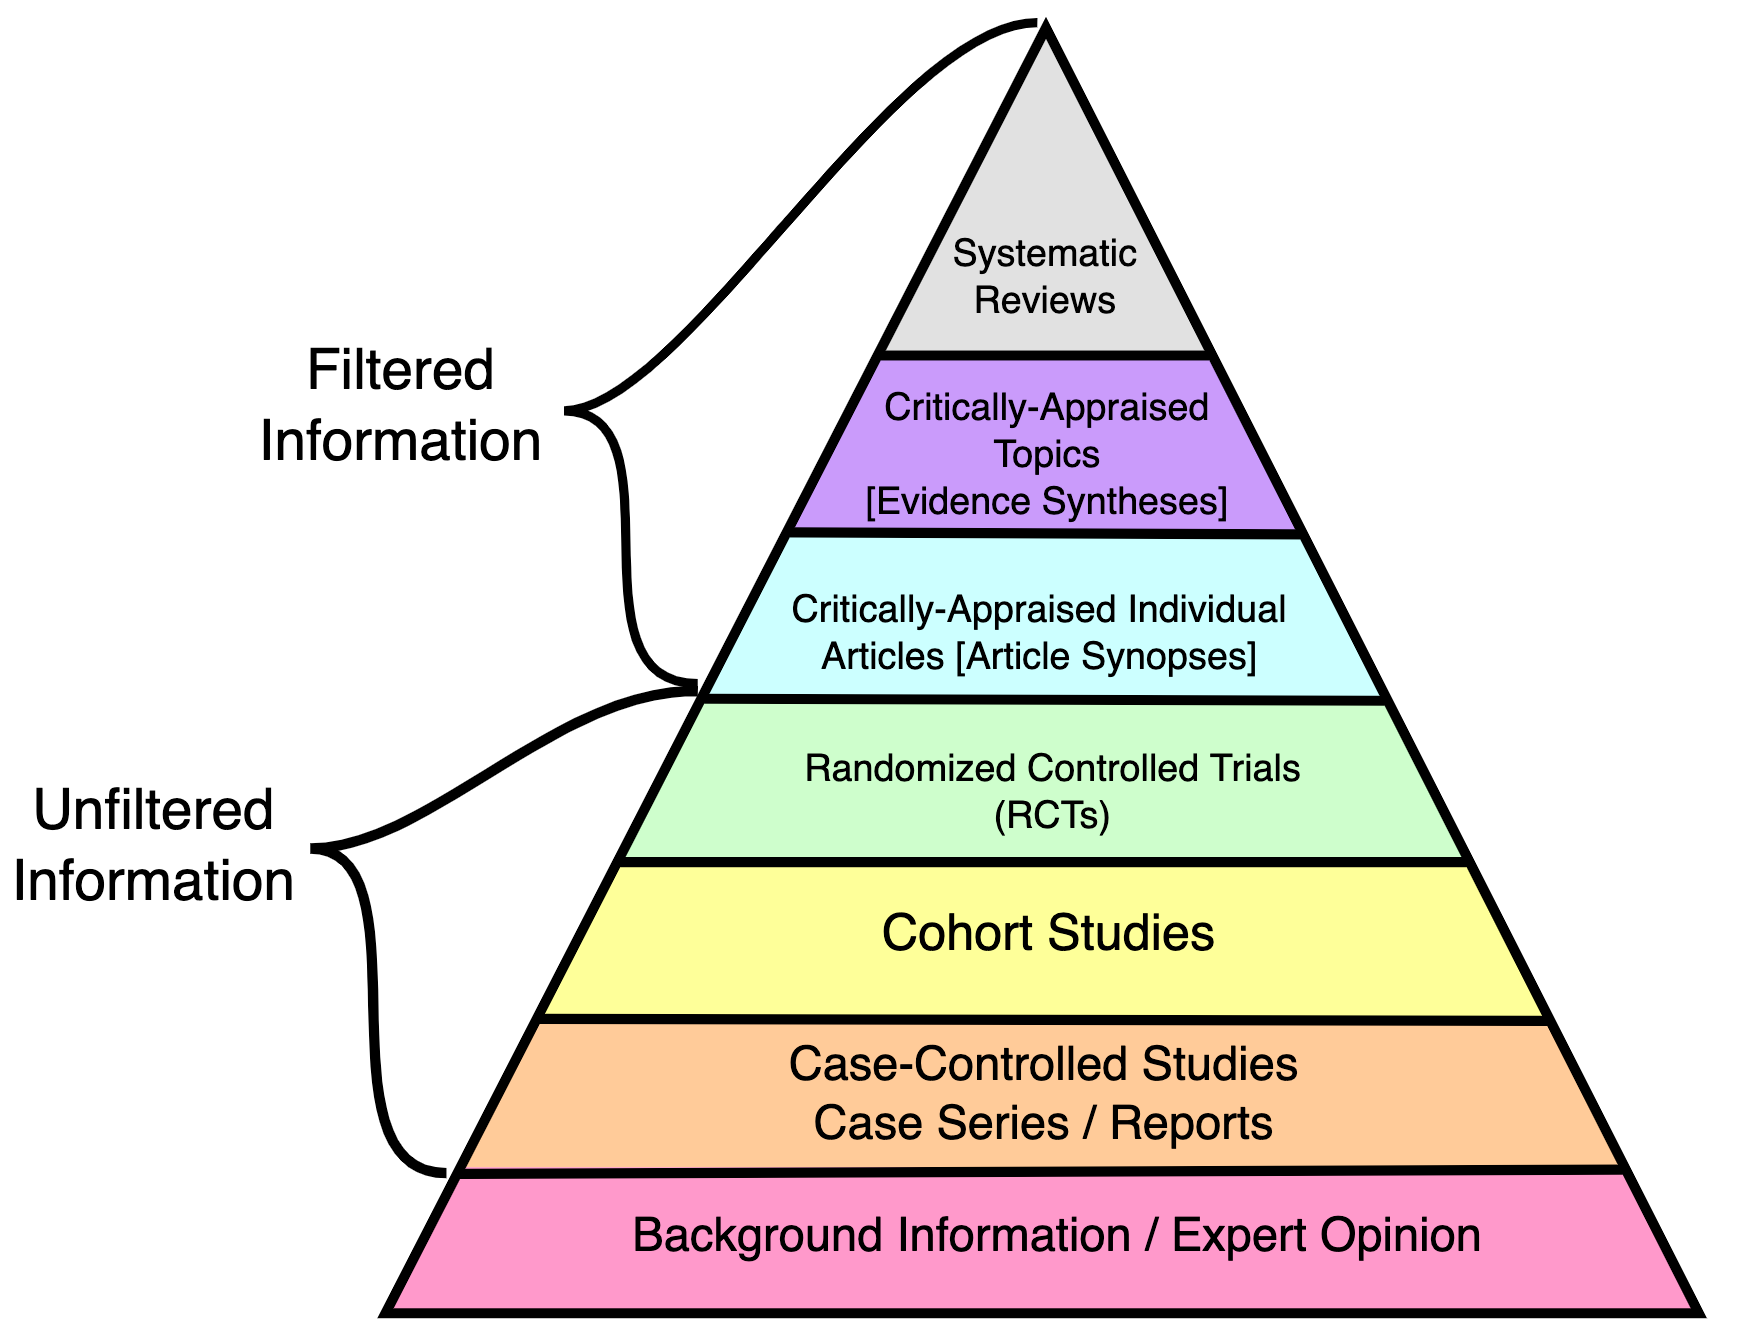 Figure from Wikimedia by CFCF. Keep in mind that this hierarchy is not free from criticism and take it just as a useful simplification.